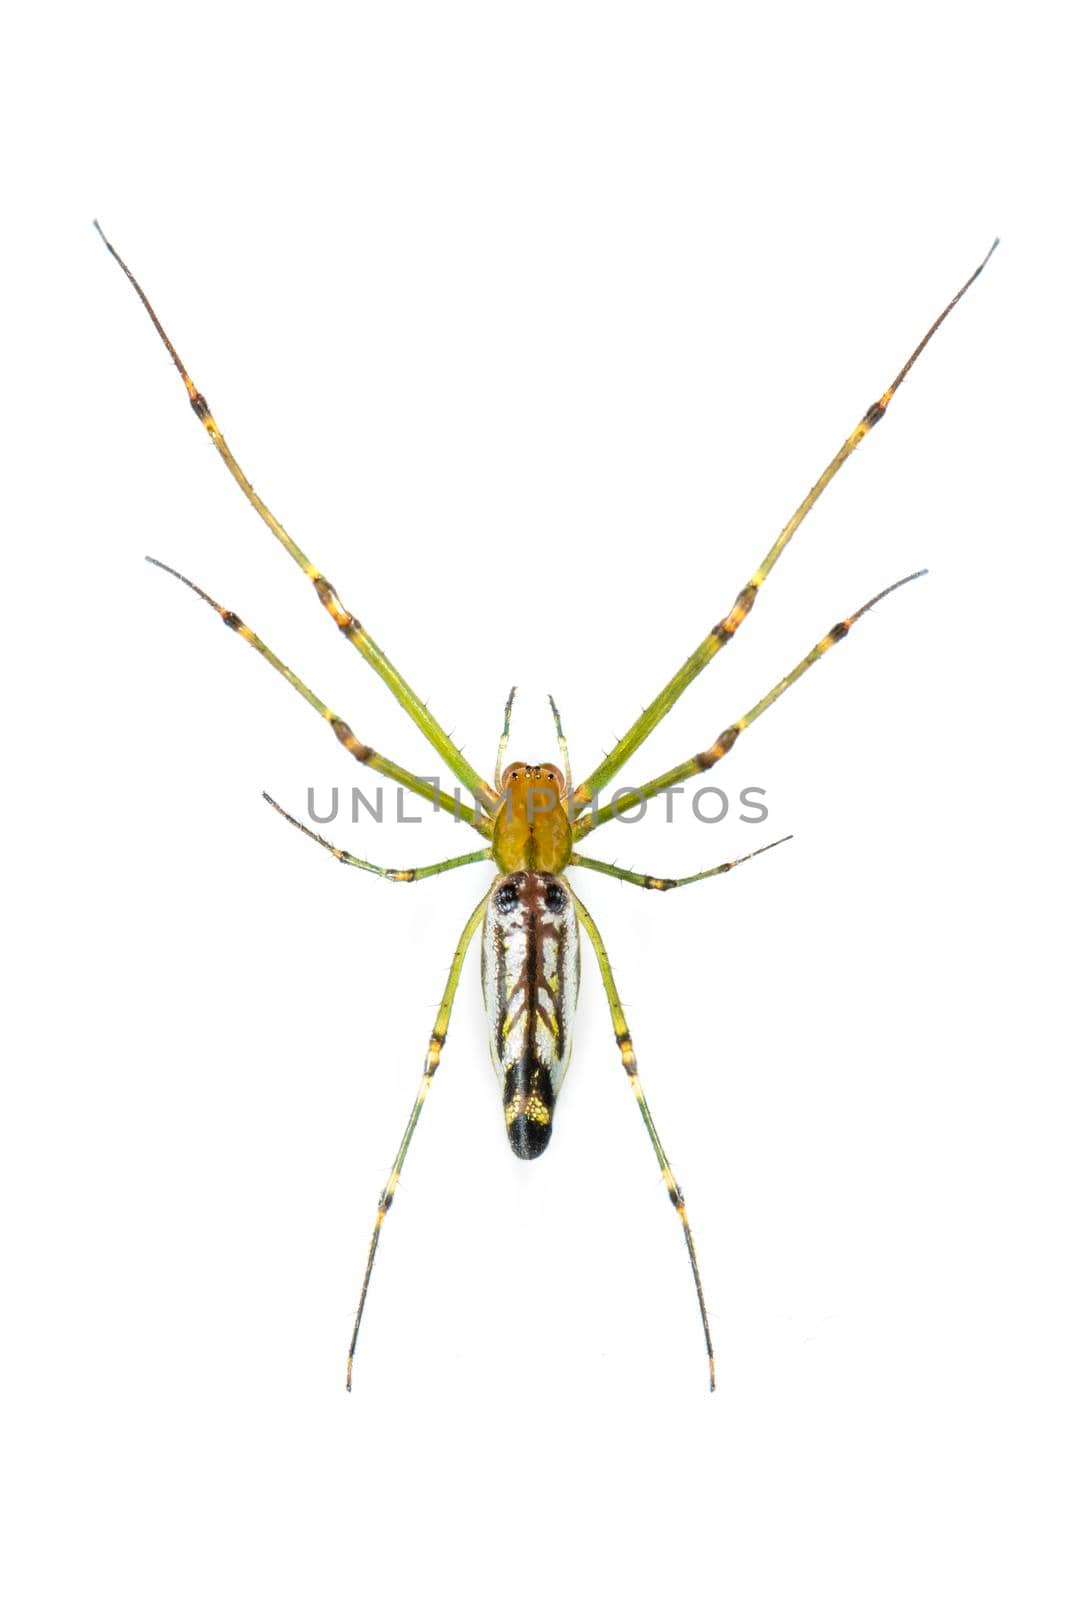 Image of Decorative Big-jawed Spider(Leucauge decorate) isolated on white background. Animal. Insect. by yod67